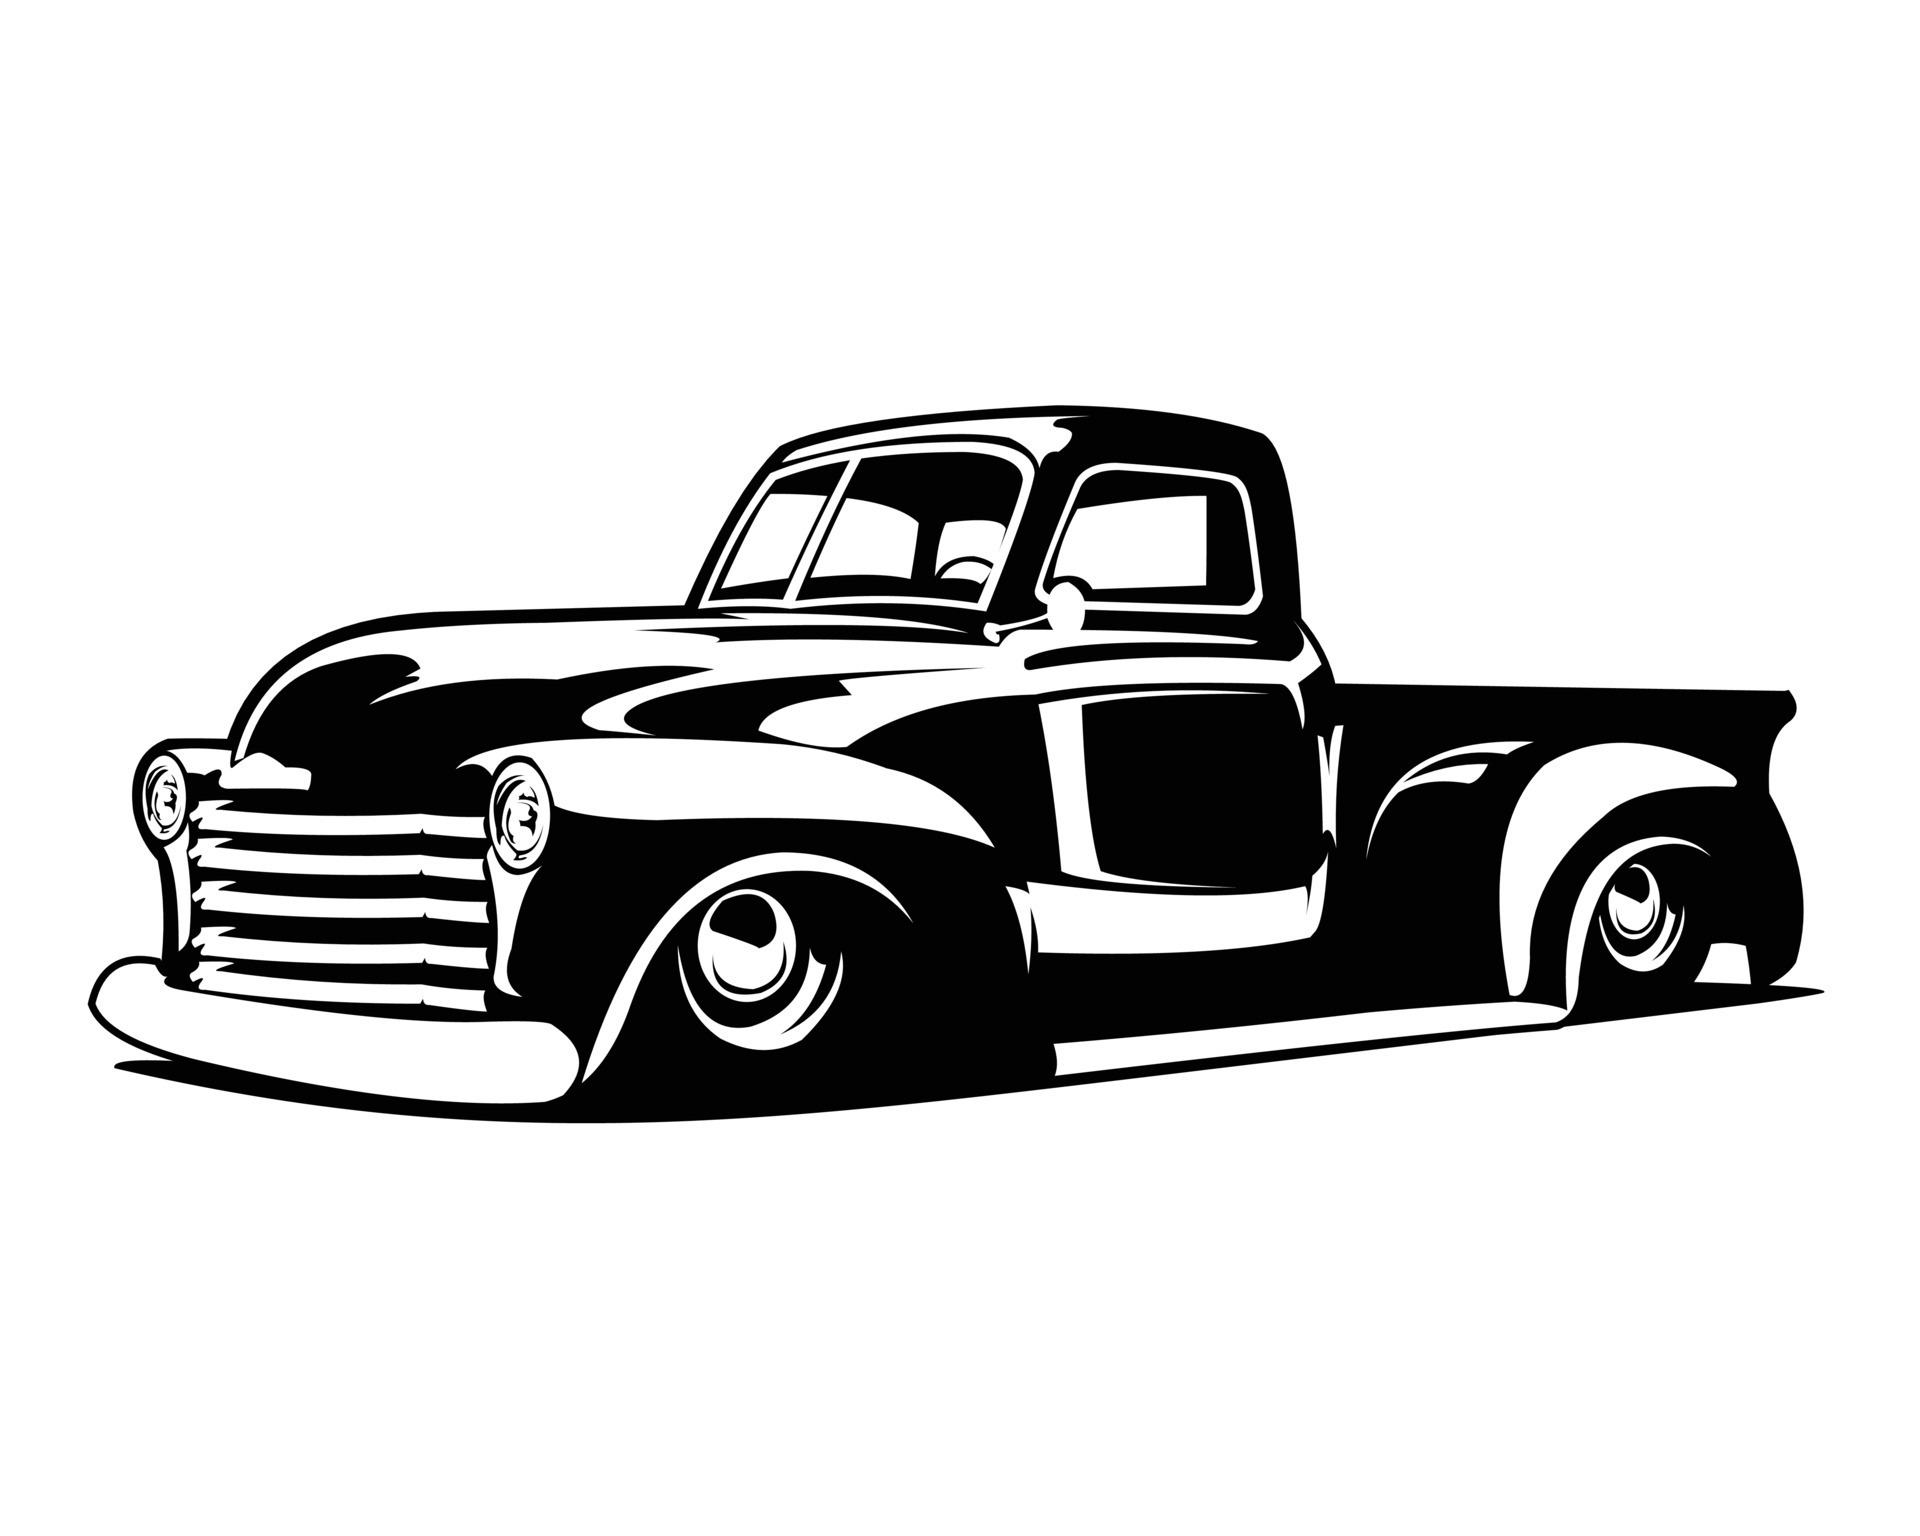 Best classic truck silhouette logo for old truck car industry